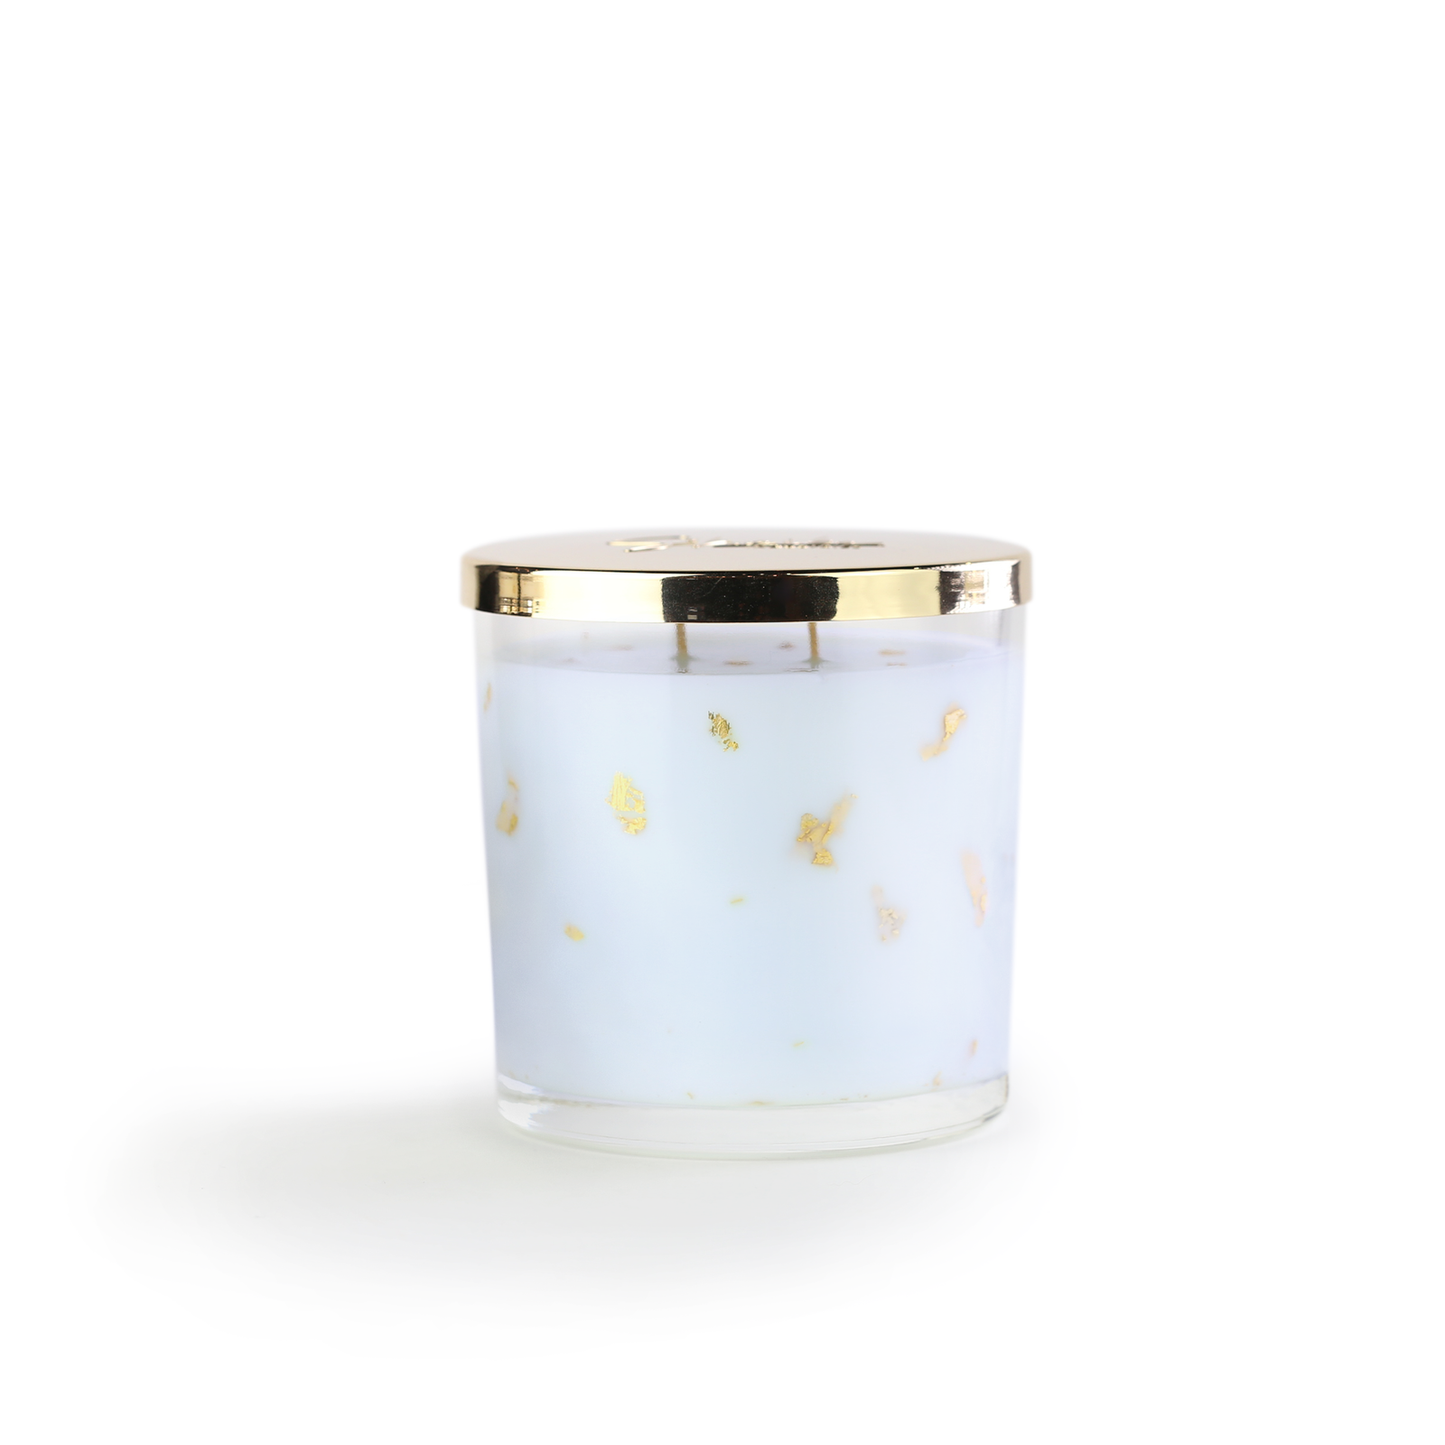 Sapphire Sea Breeze Scented Candle - Blooming Gorgeous